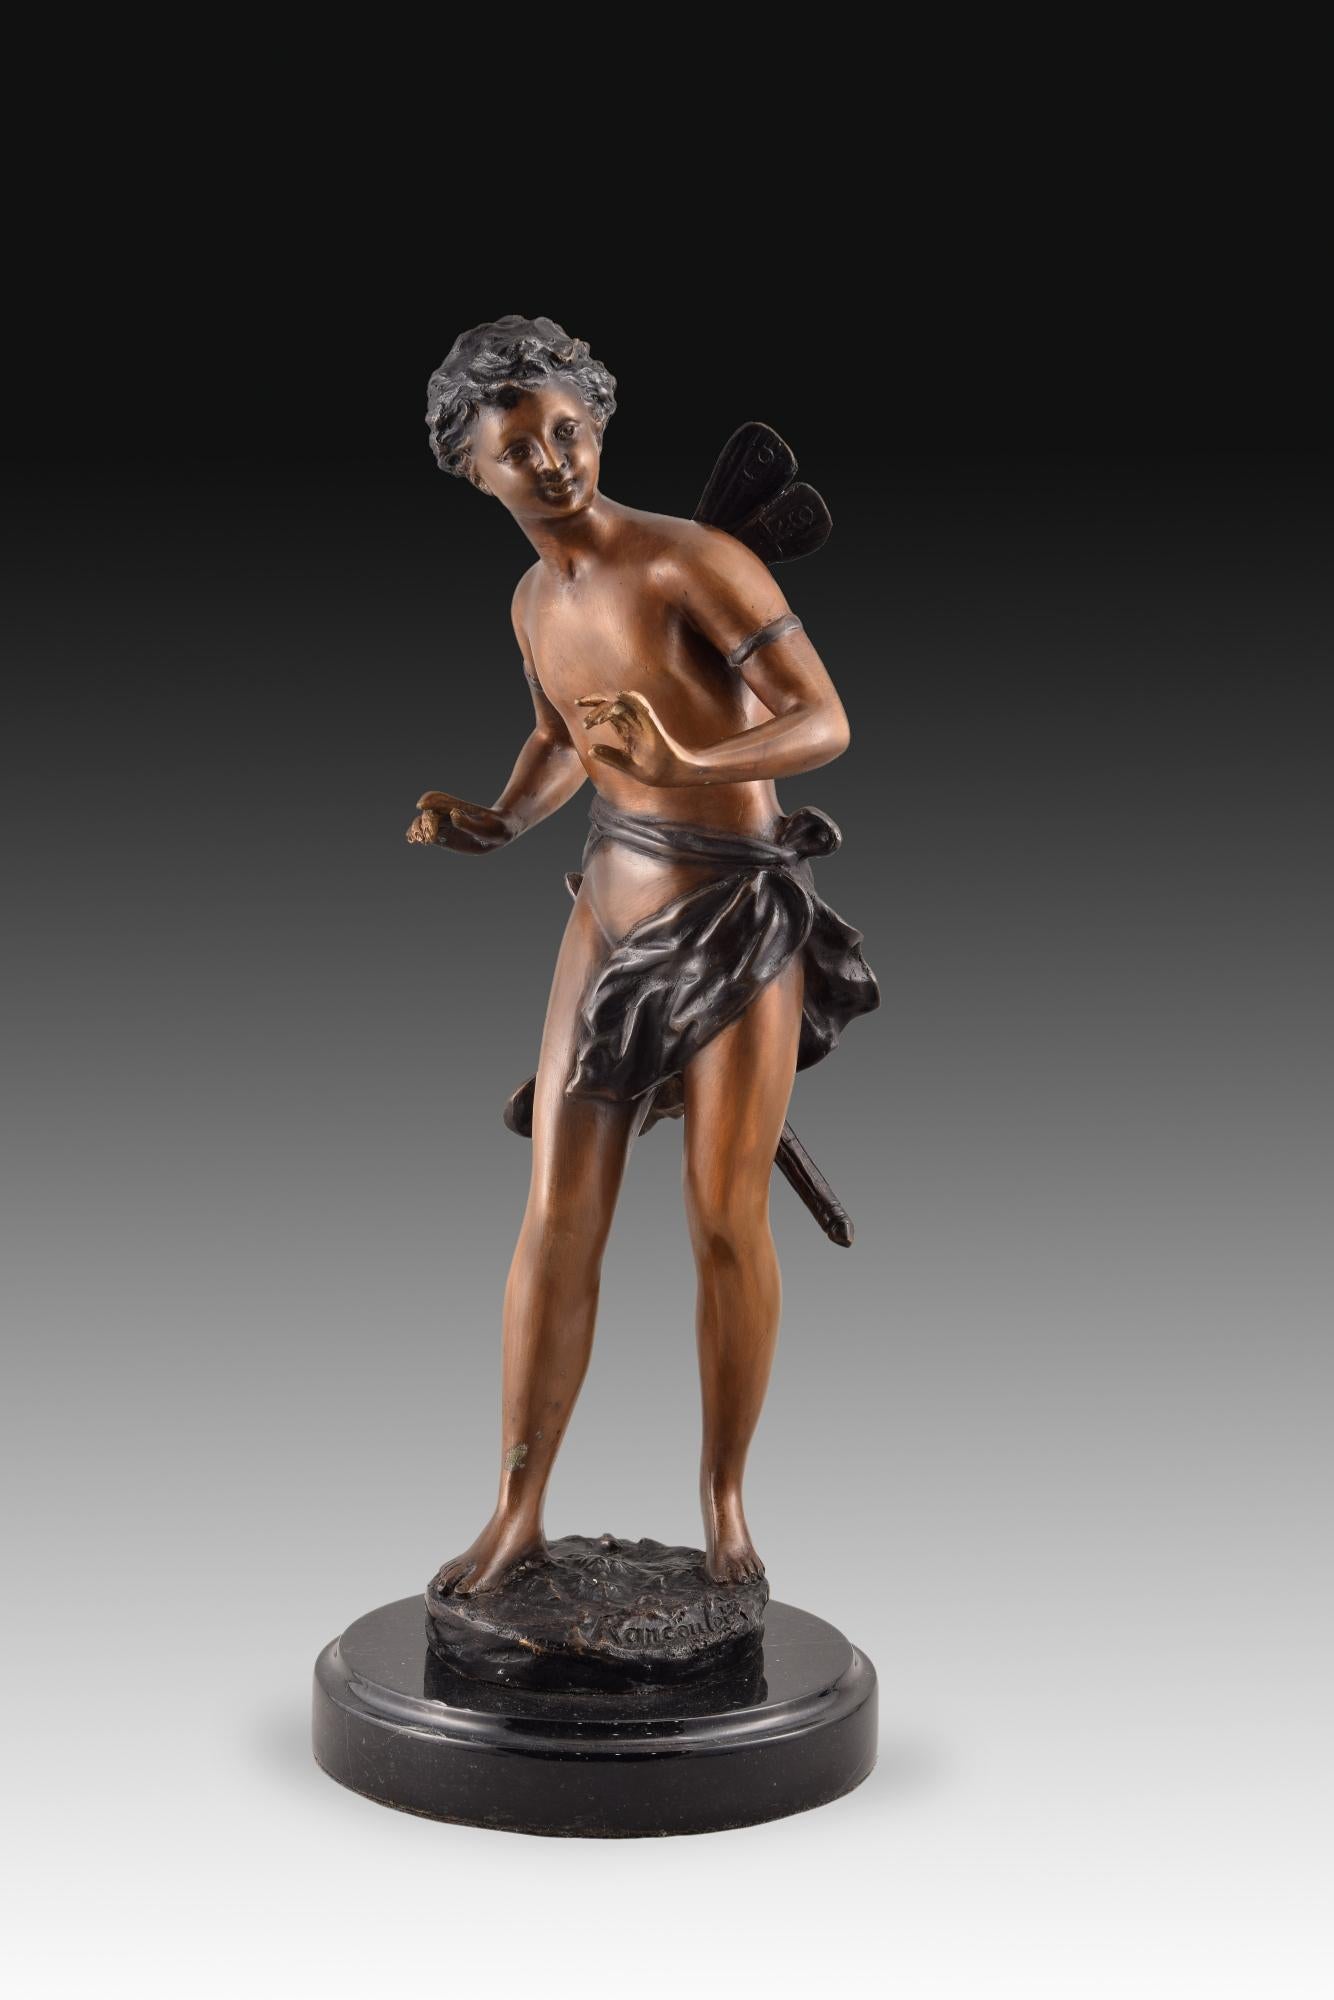 Lost wax casting. Marble base.
The god of love is distinguished from classical mythology by the quiver of arrows on its back and by the wings that are butterfly instead of feathered, the most frequent attribute. This theme was very common in the